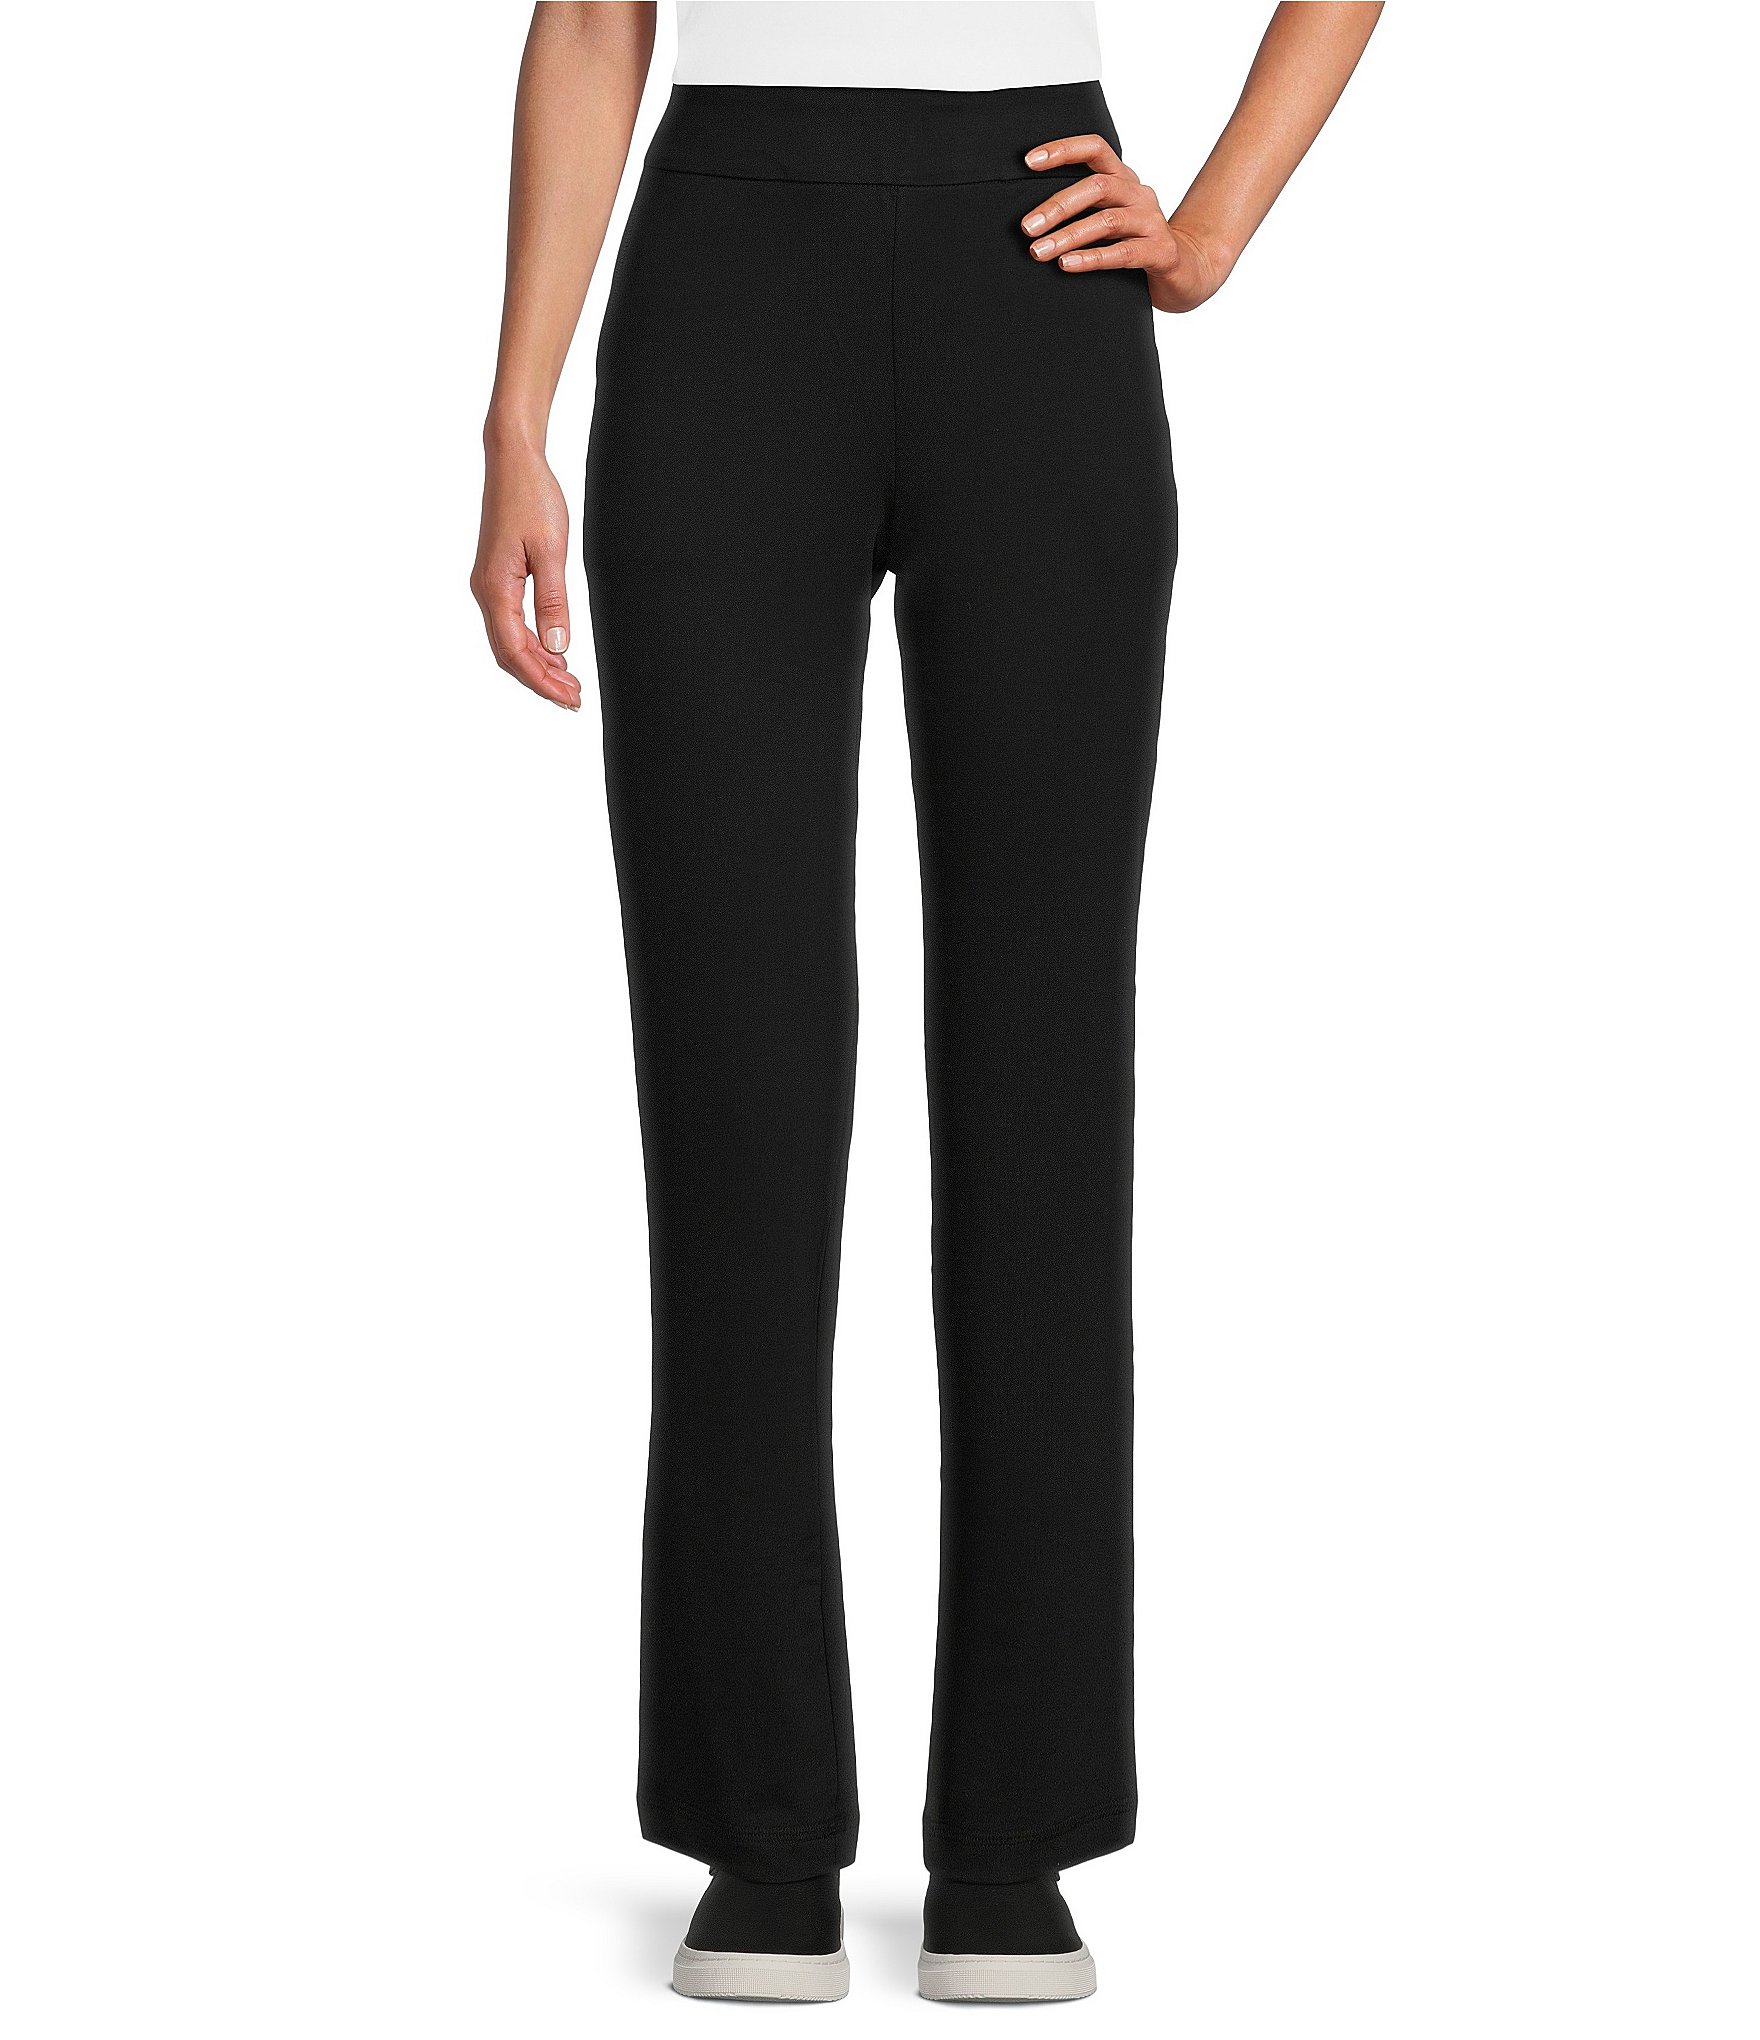 Allison Daley Petite Size Coordinating Straight Leg Pull-On Pant ...